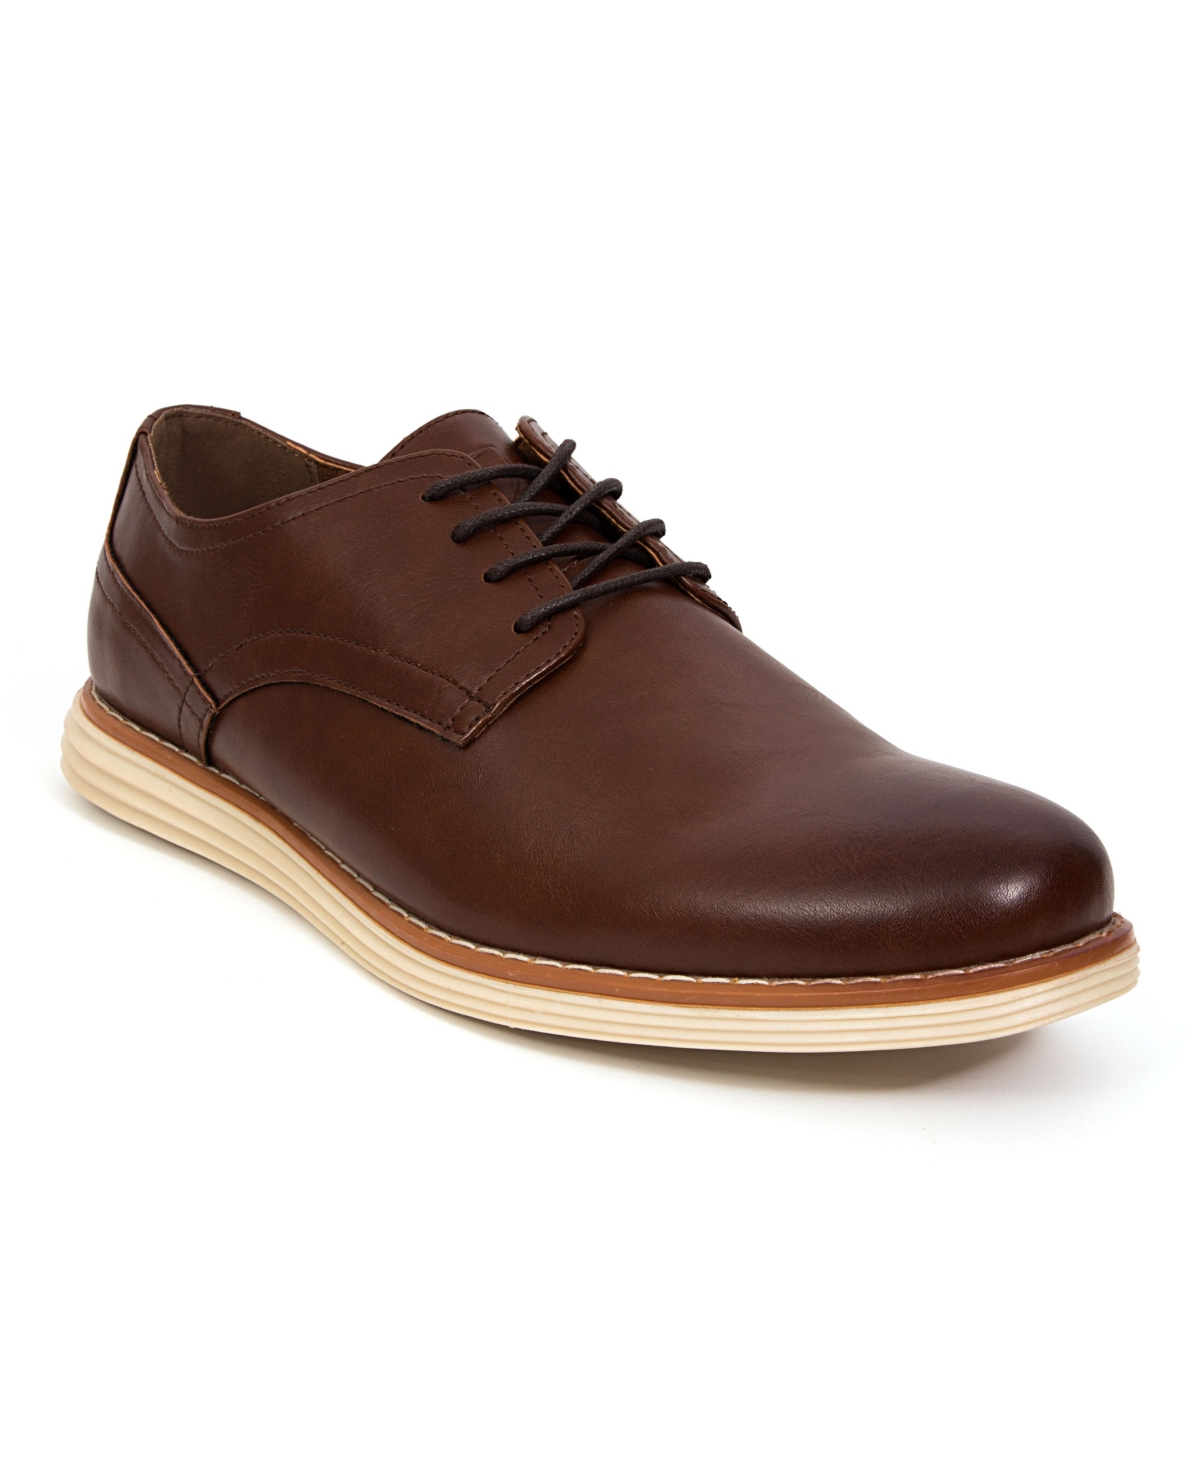 Shop Deer Stags Men's Union Oxford Shoes In Brown